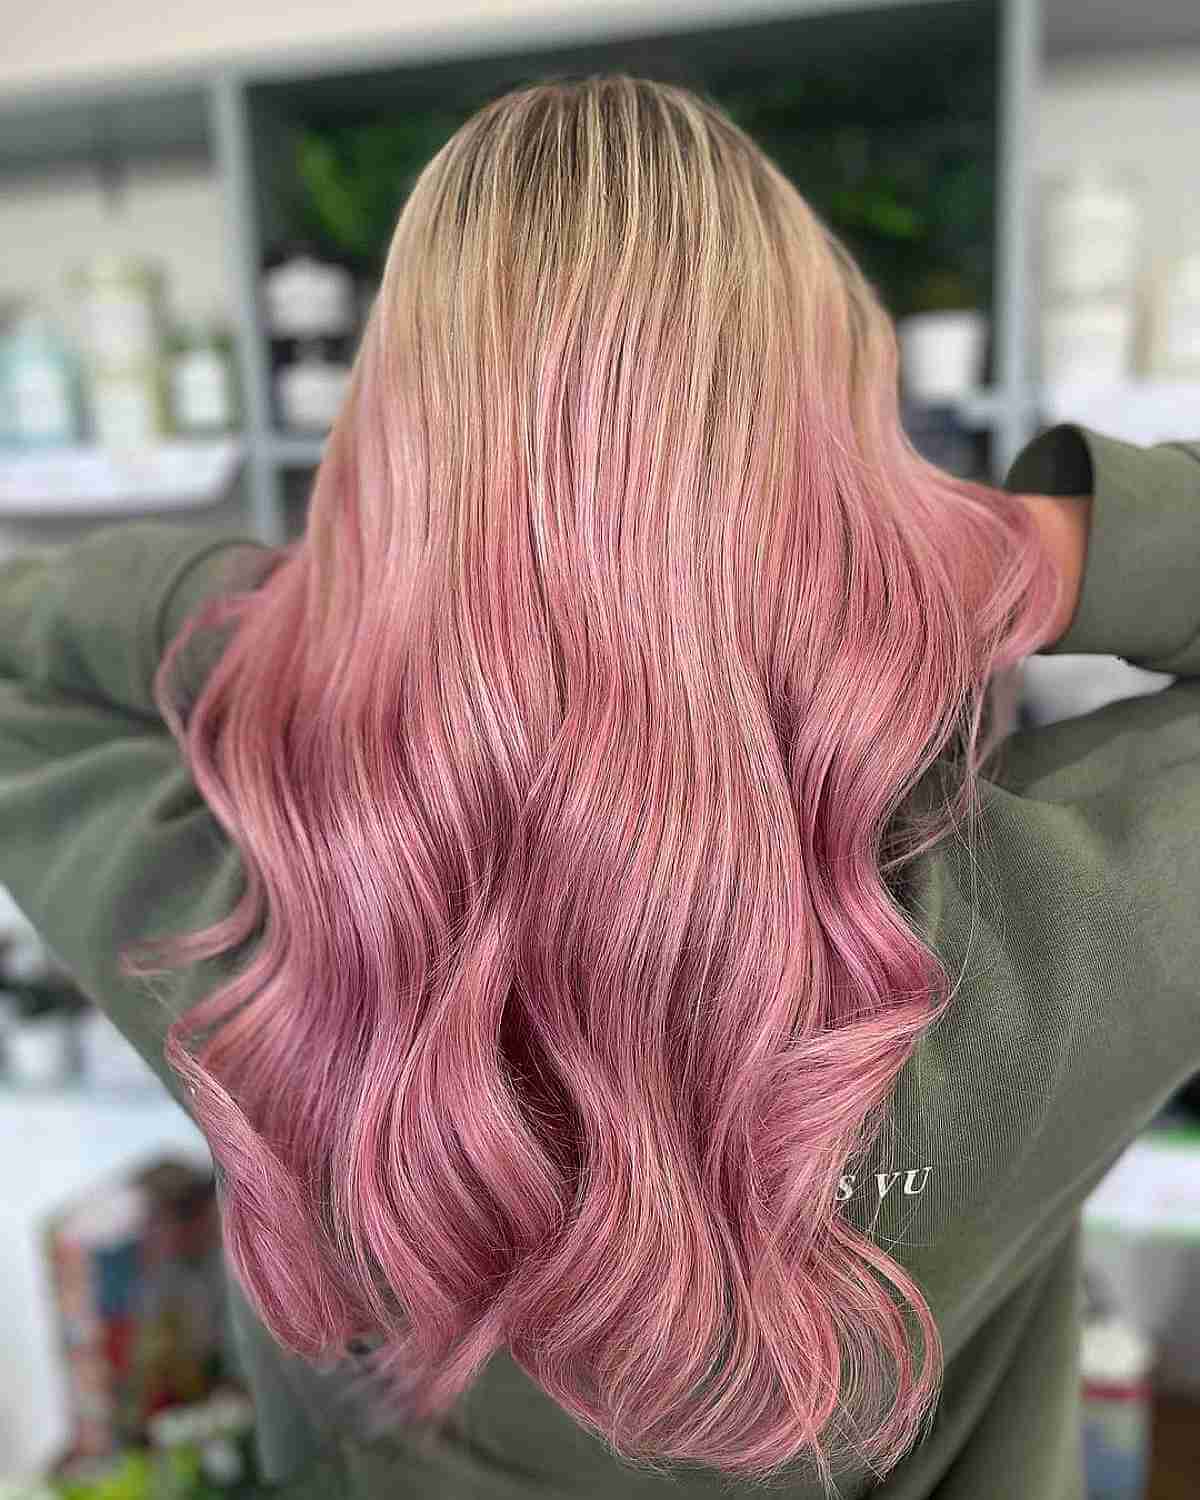 Pink Balayage: 21 Photos That Will Inspire You To Try This Hair Color Next